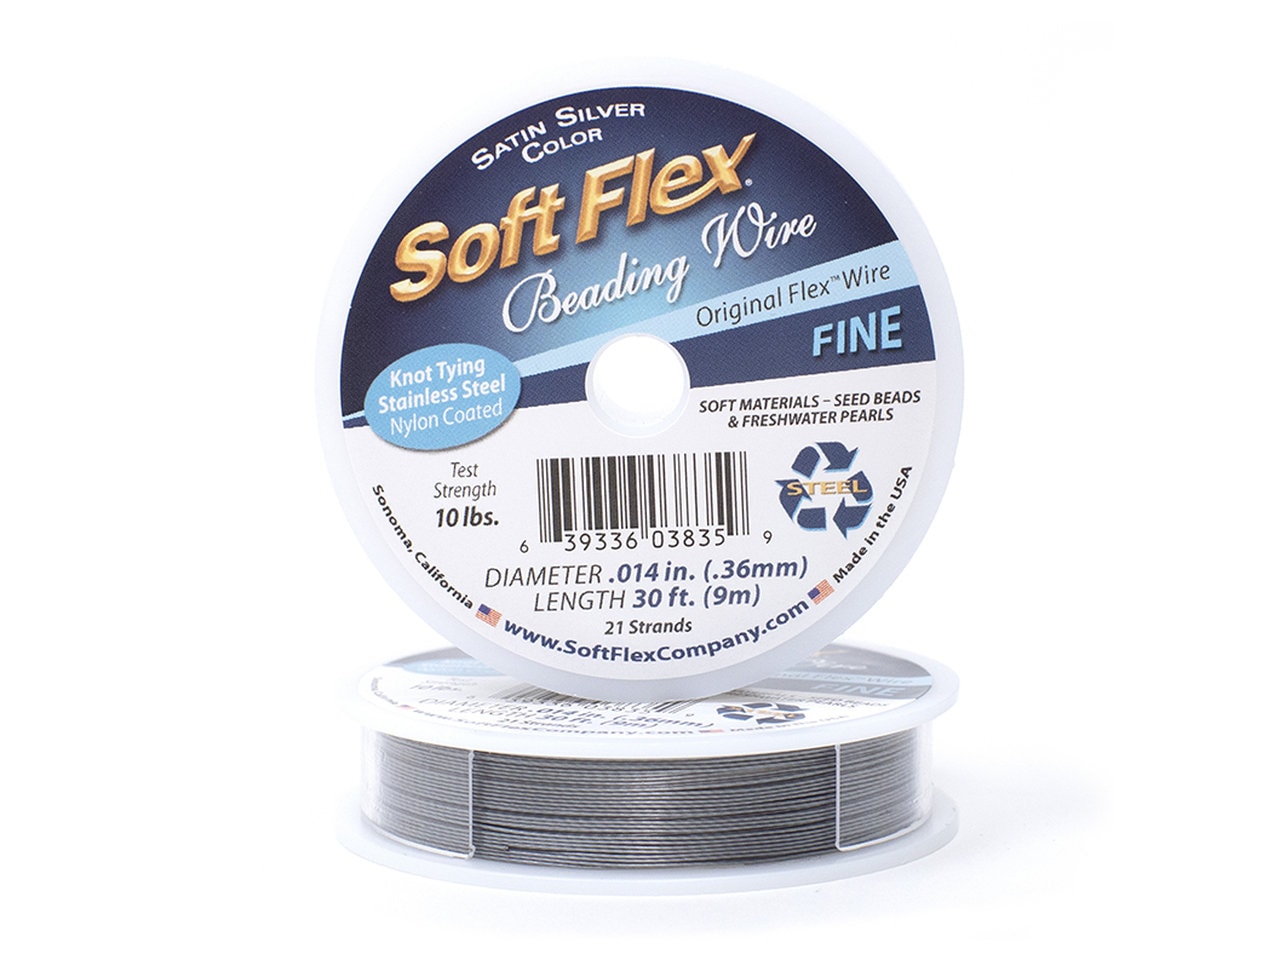 Soft Flex Satin Silver Fine Size Beading Wire, 30 Foot Spool For Jewelry  Making